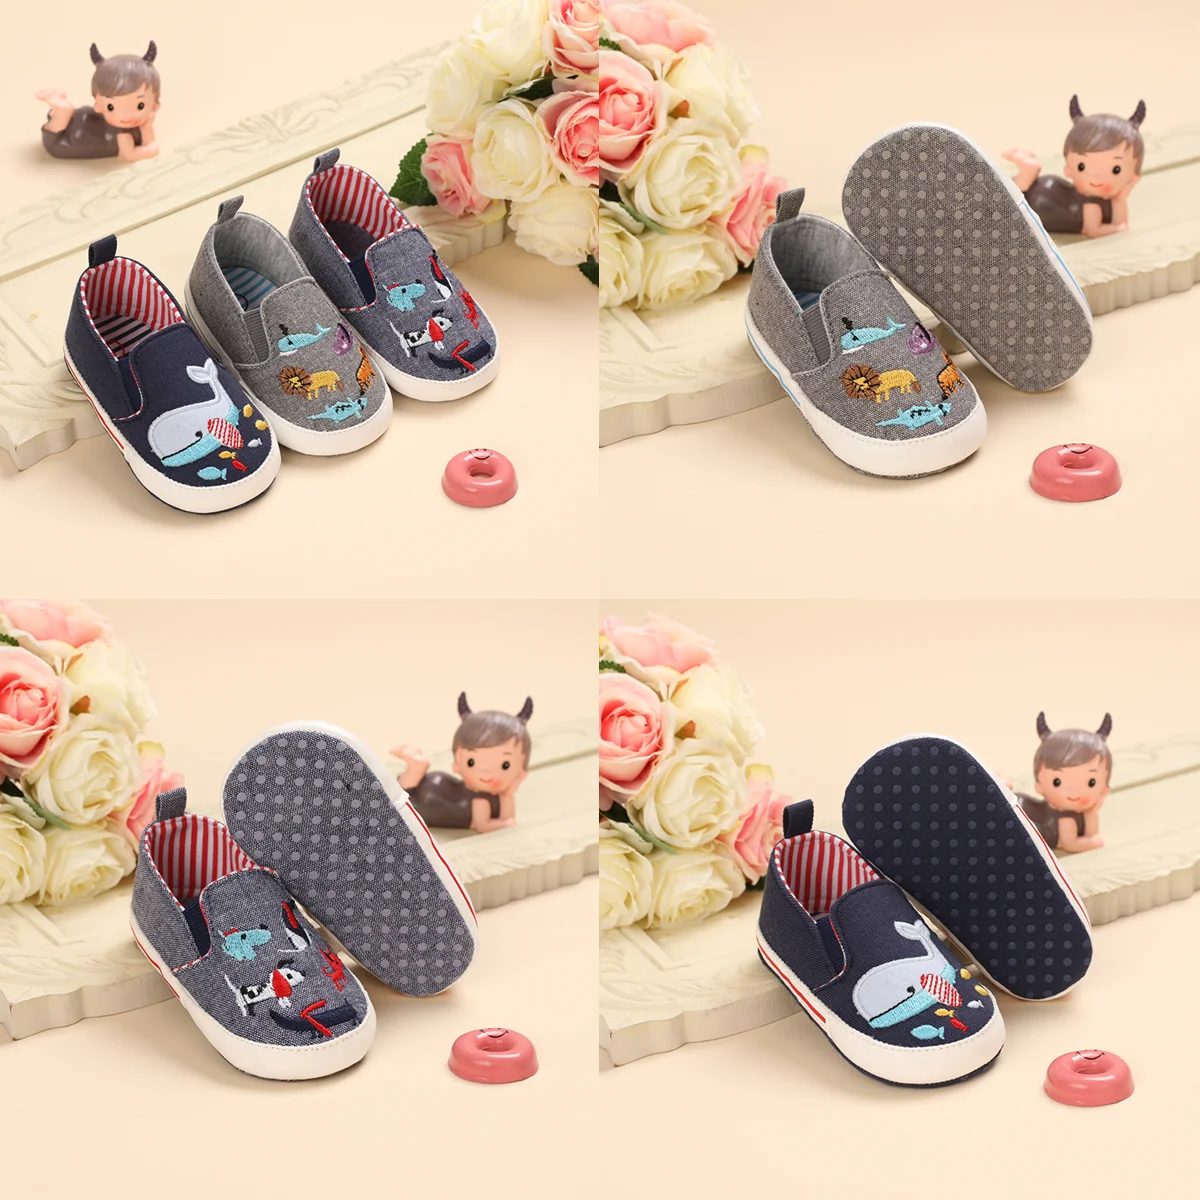 Newborn baby shoes boys and girls fashion canvas cartoon casual walking shoes First Walker soft-soled non-slip toddler shoes summer newborn baby fashion canvas comfortable soft soled baby shoes boys and girls baby shoes cotton soled breathable sandals